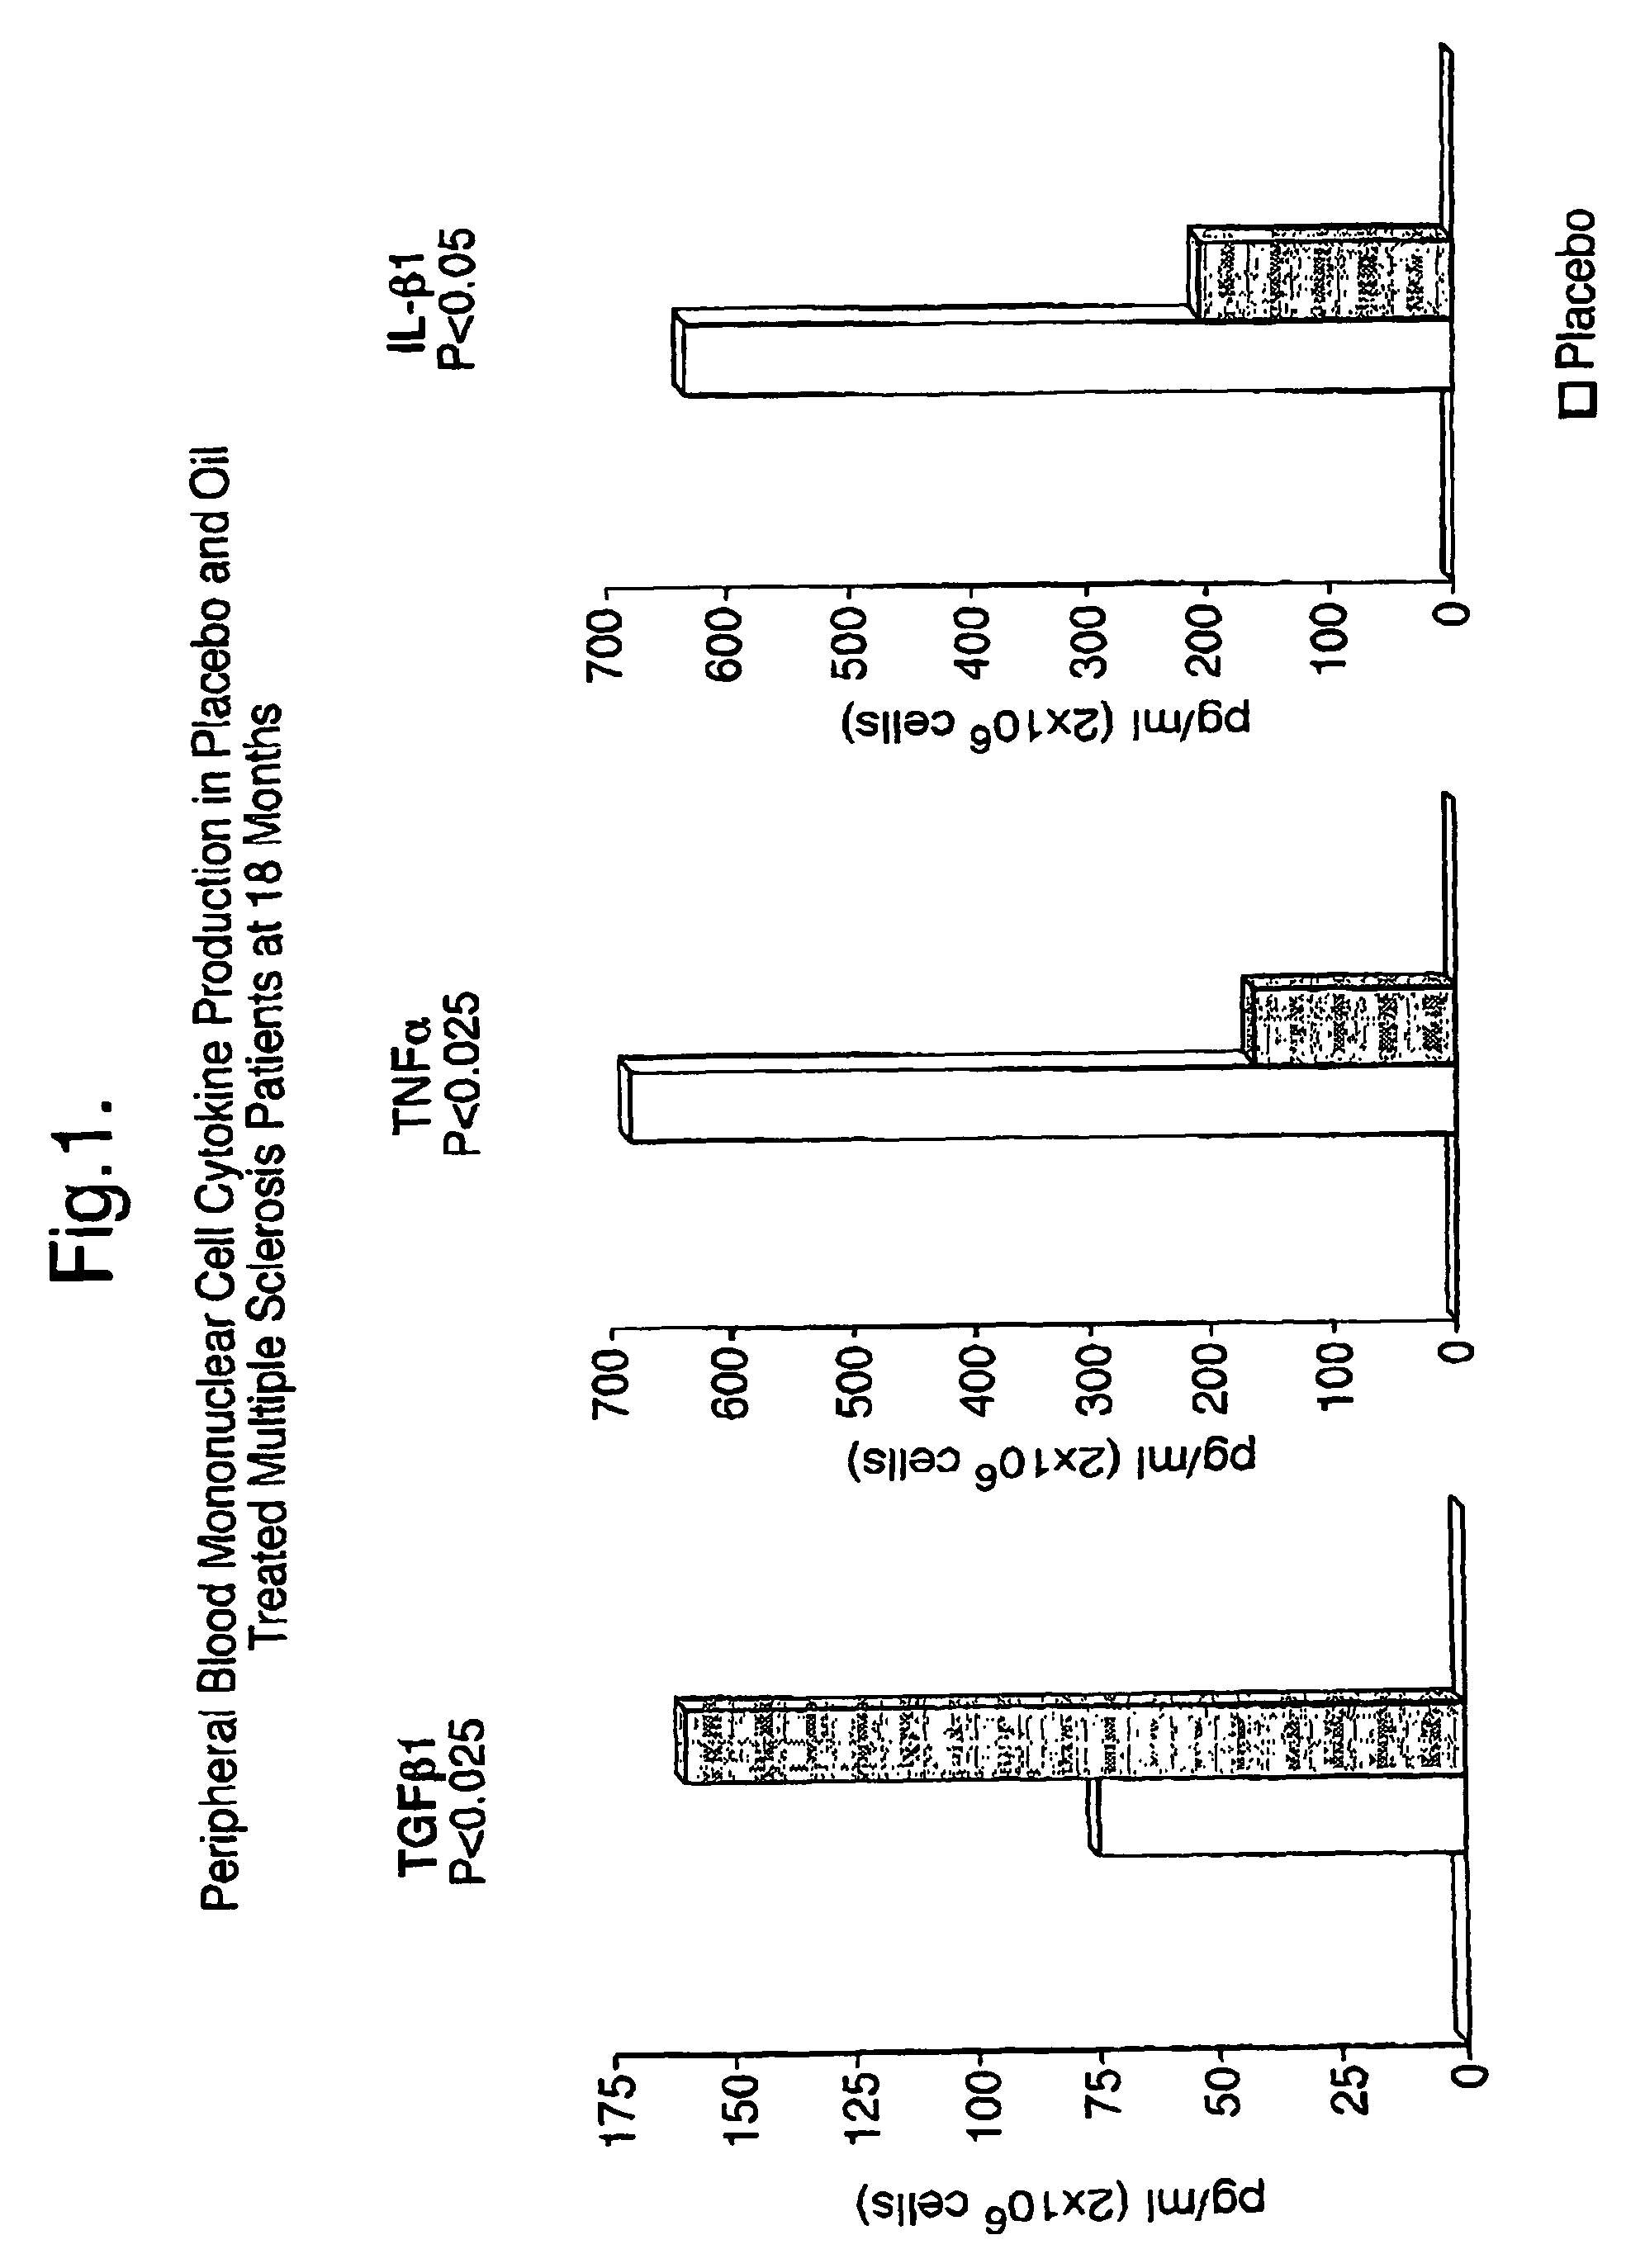 Use of triglyceride oils containing γ-linolenic acid residues and linoleic acid residues for the treatment of neurodegenerative disease